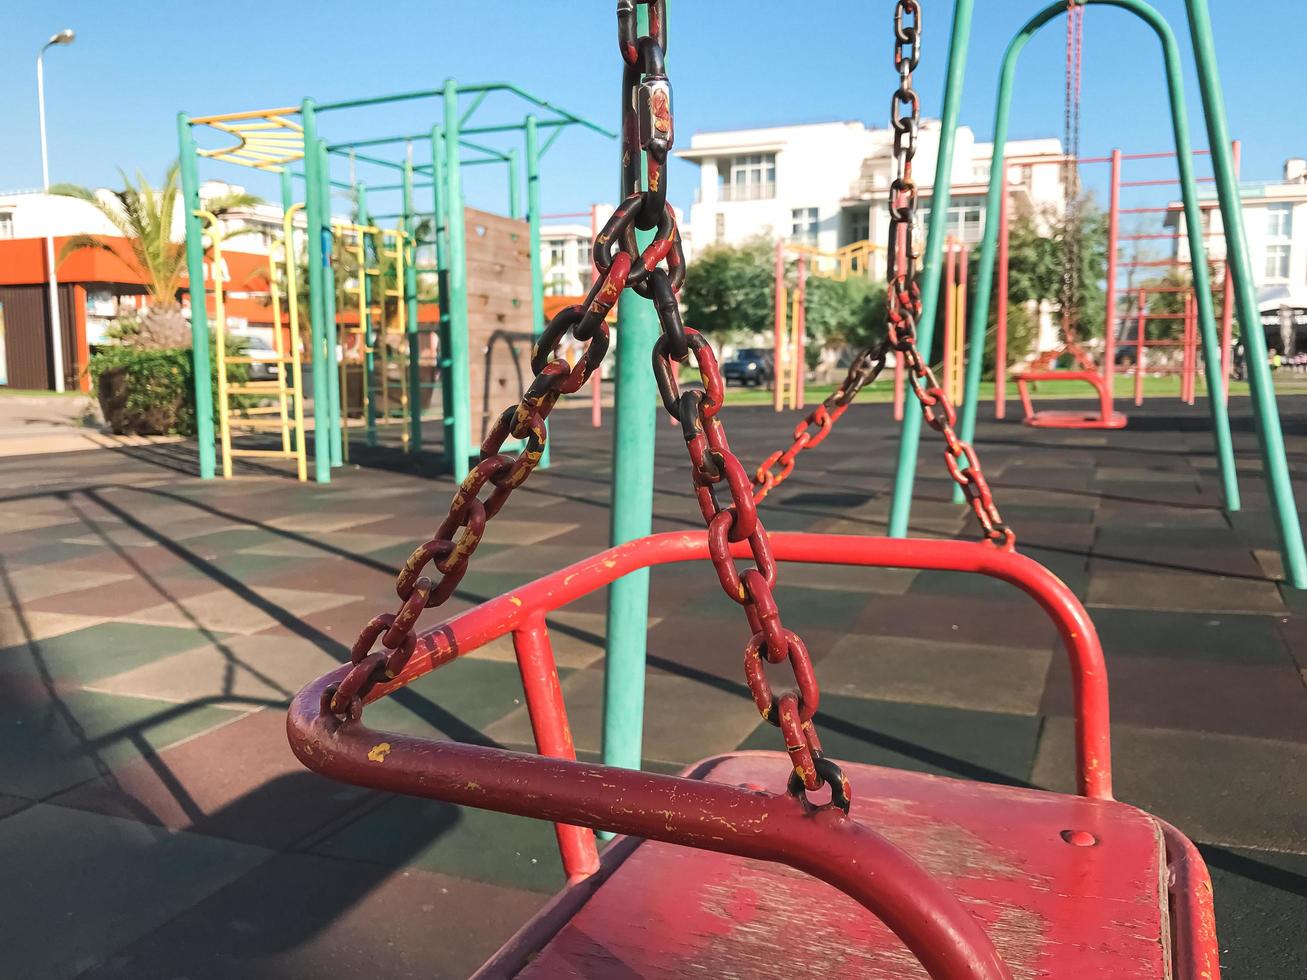 Swings on outdoor playground. Close up. Adler city, Russia photo